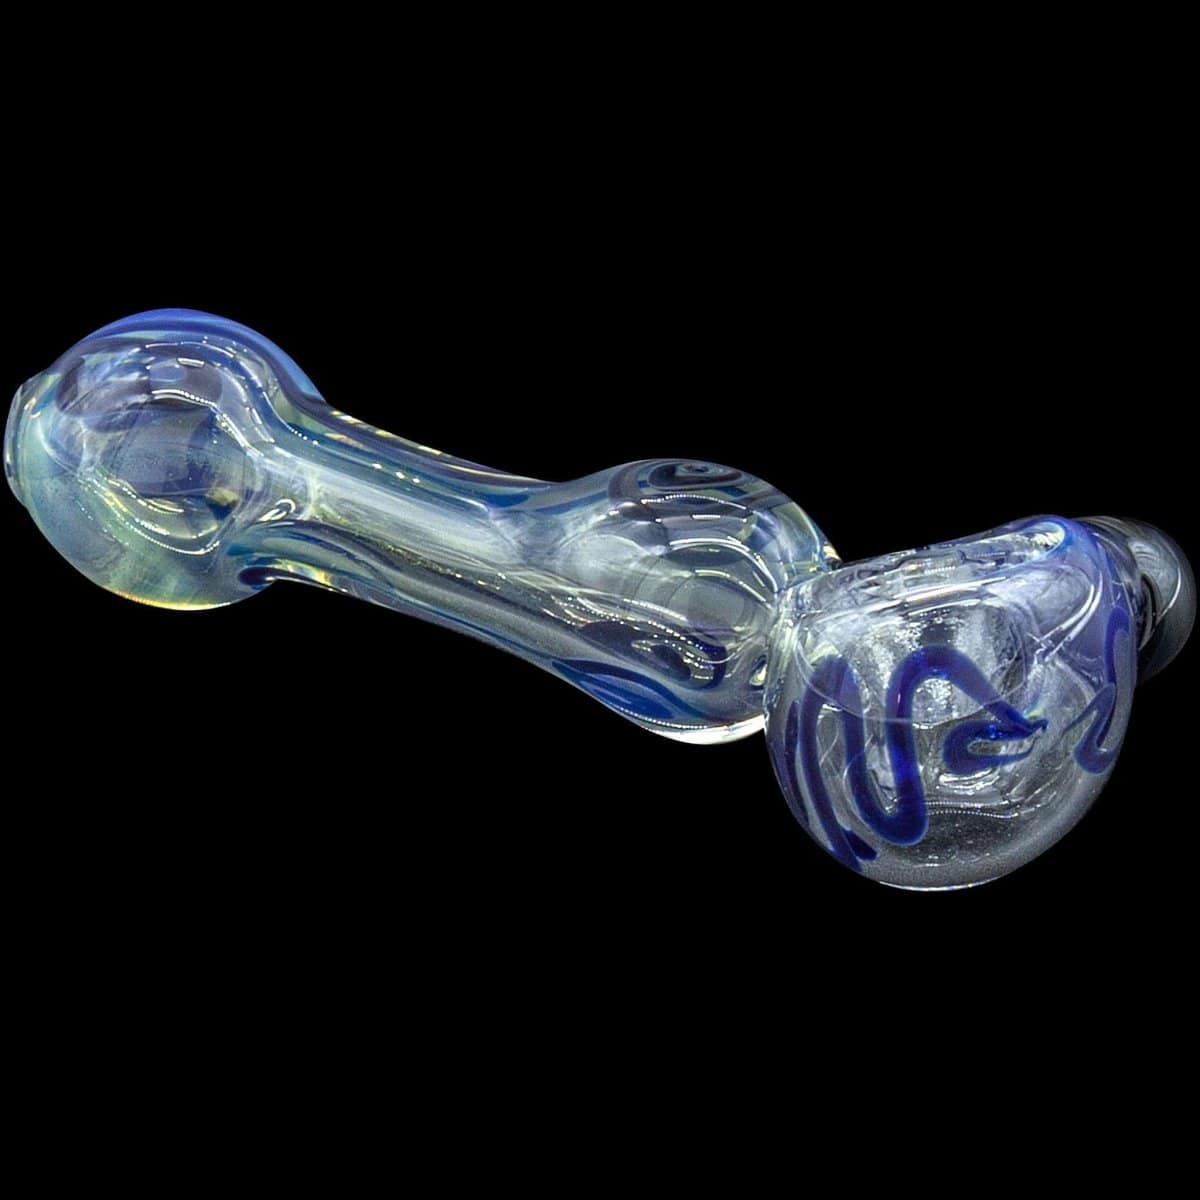 LA Pipes Hand Pipe "Painted Warrior Spoon" Glass Pipe